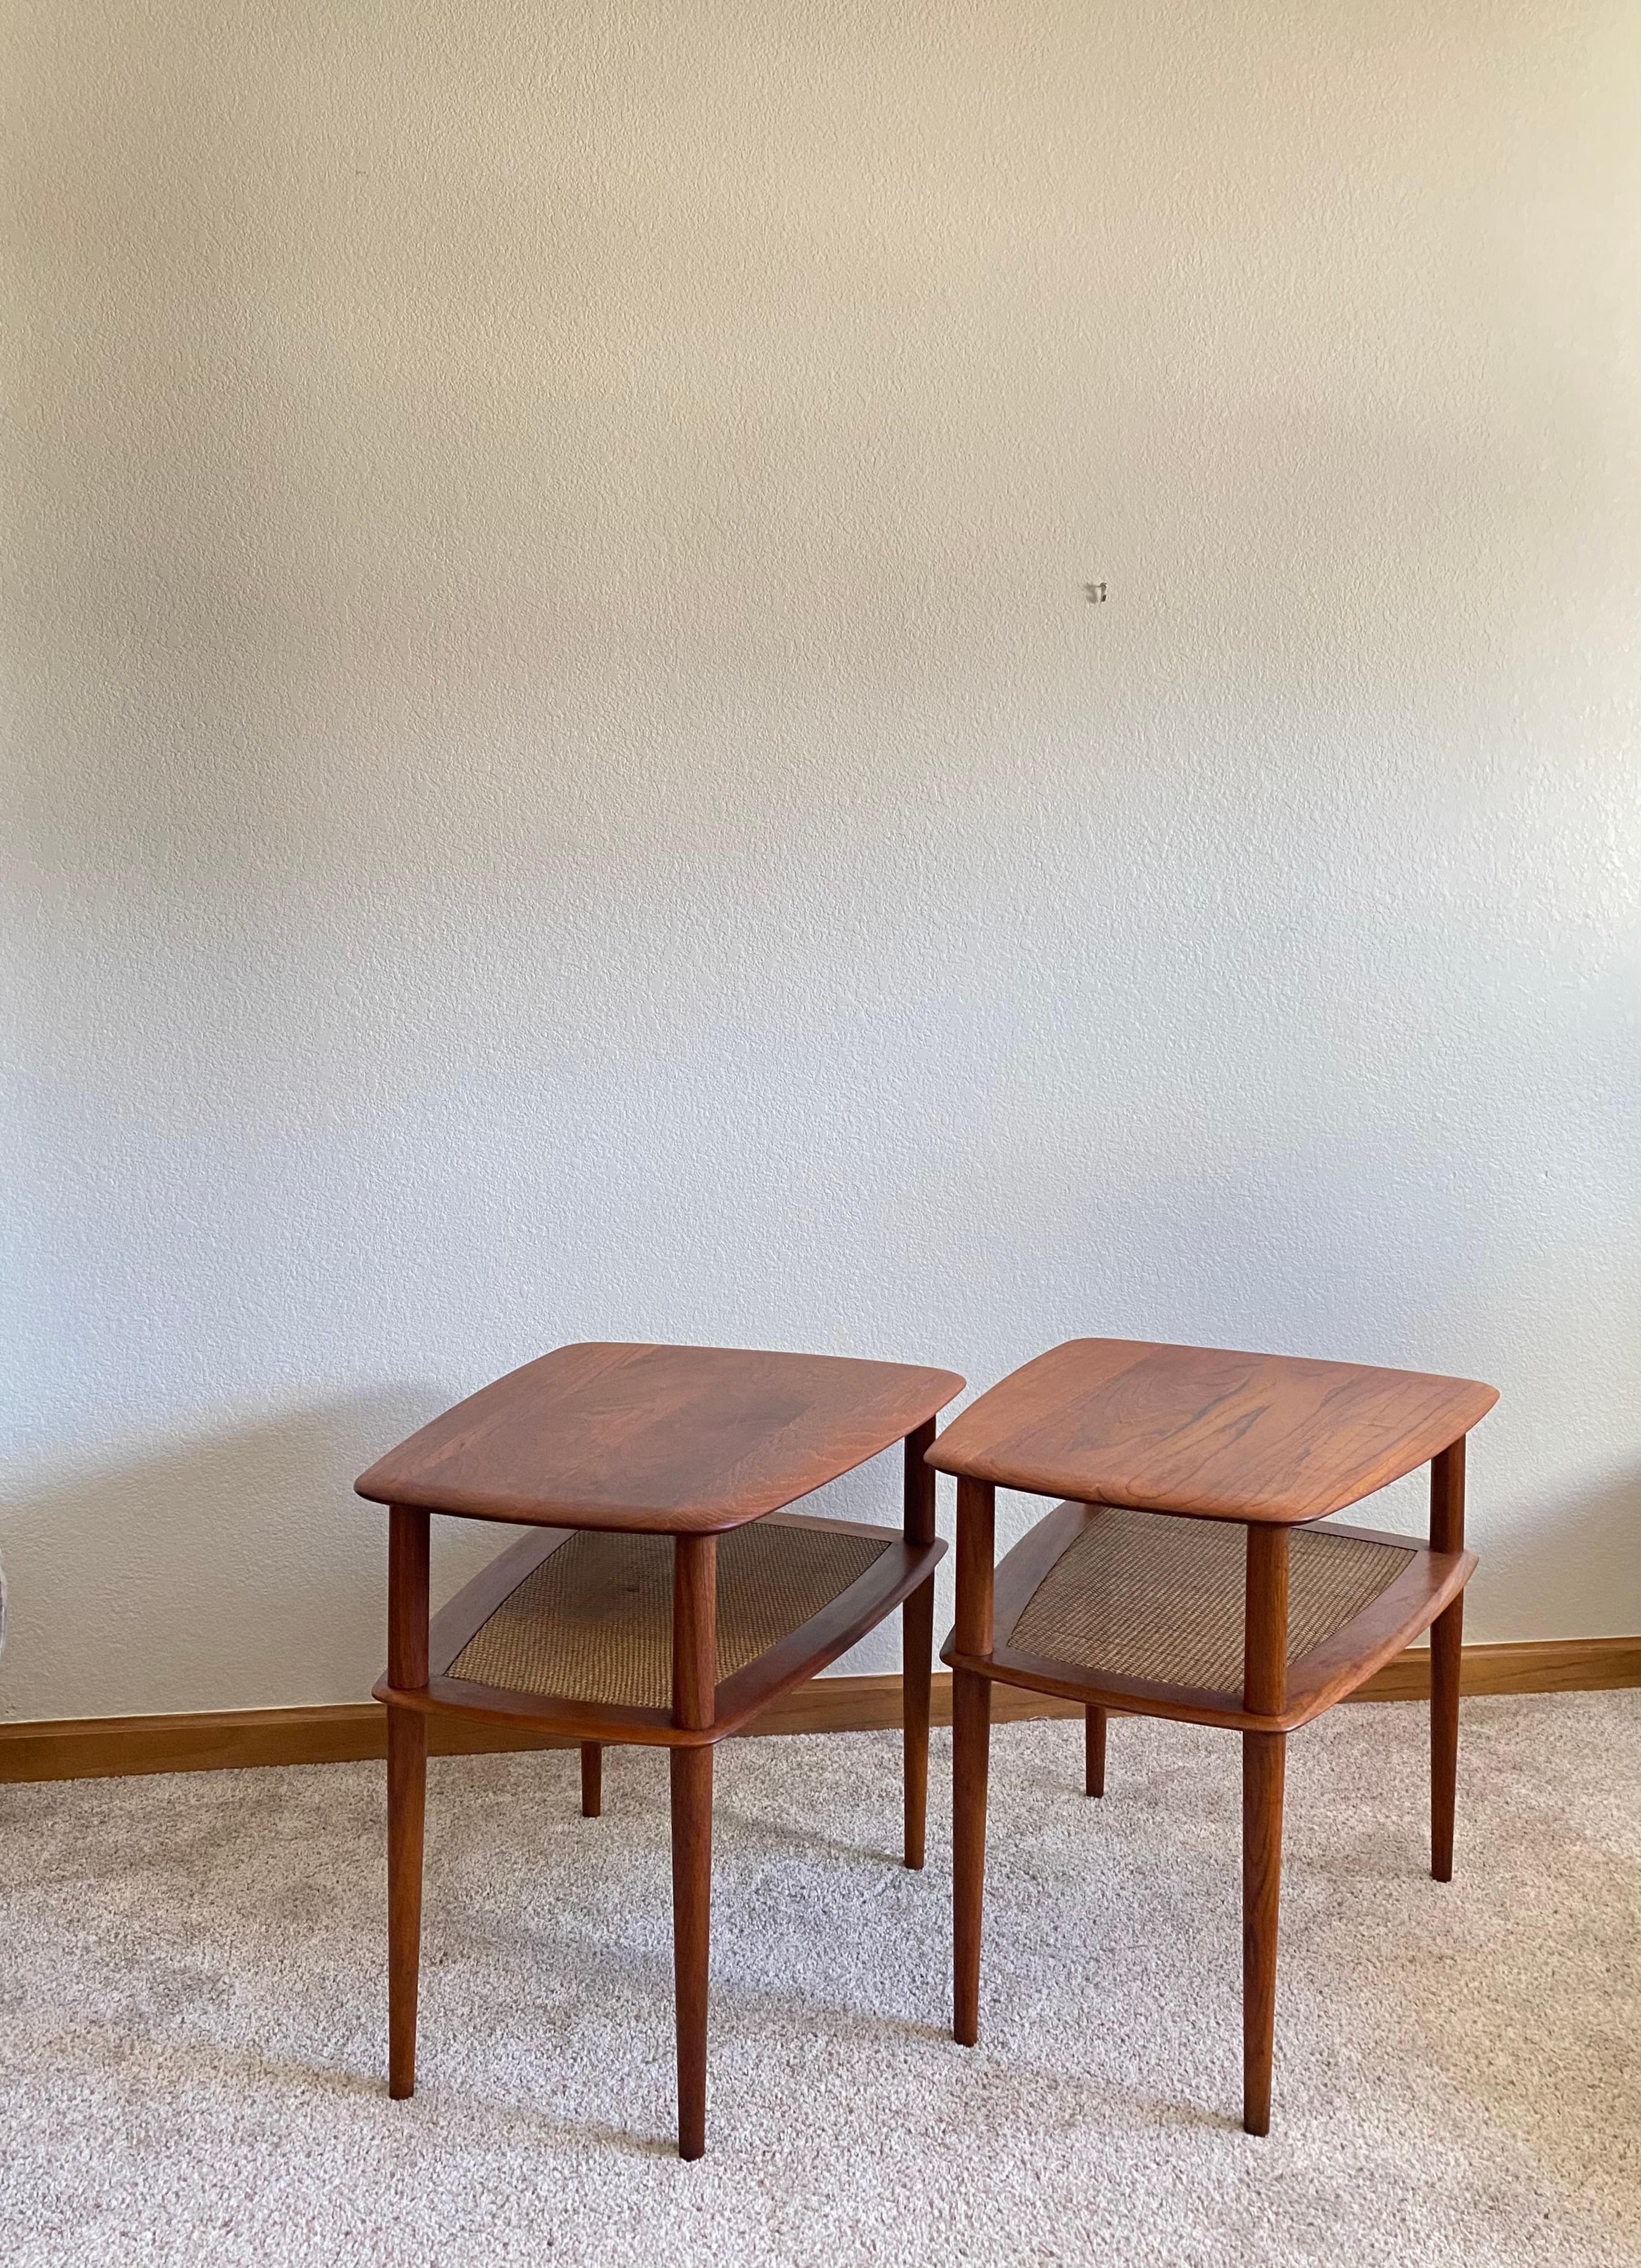 Side tables / night stands in solid teak and caned 2nd tier. Designed by Peter Hvidt and Orla Mølgaard for France & Son in the 1960s, and made in Denmark. Great original condition with lightly refreshed surfaces and original caning. One table